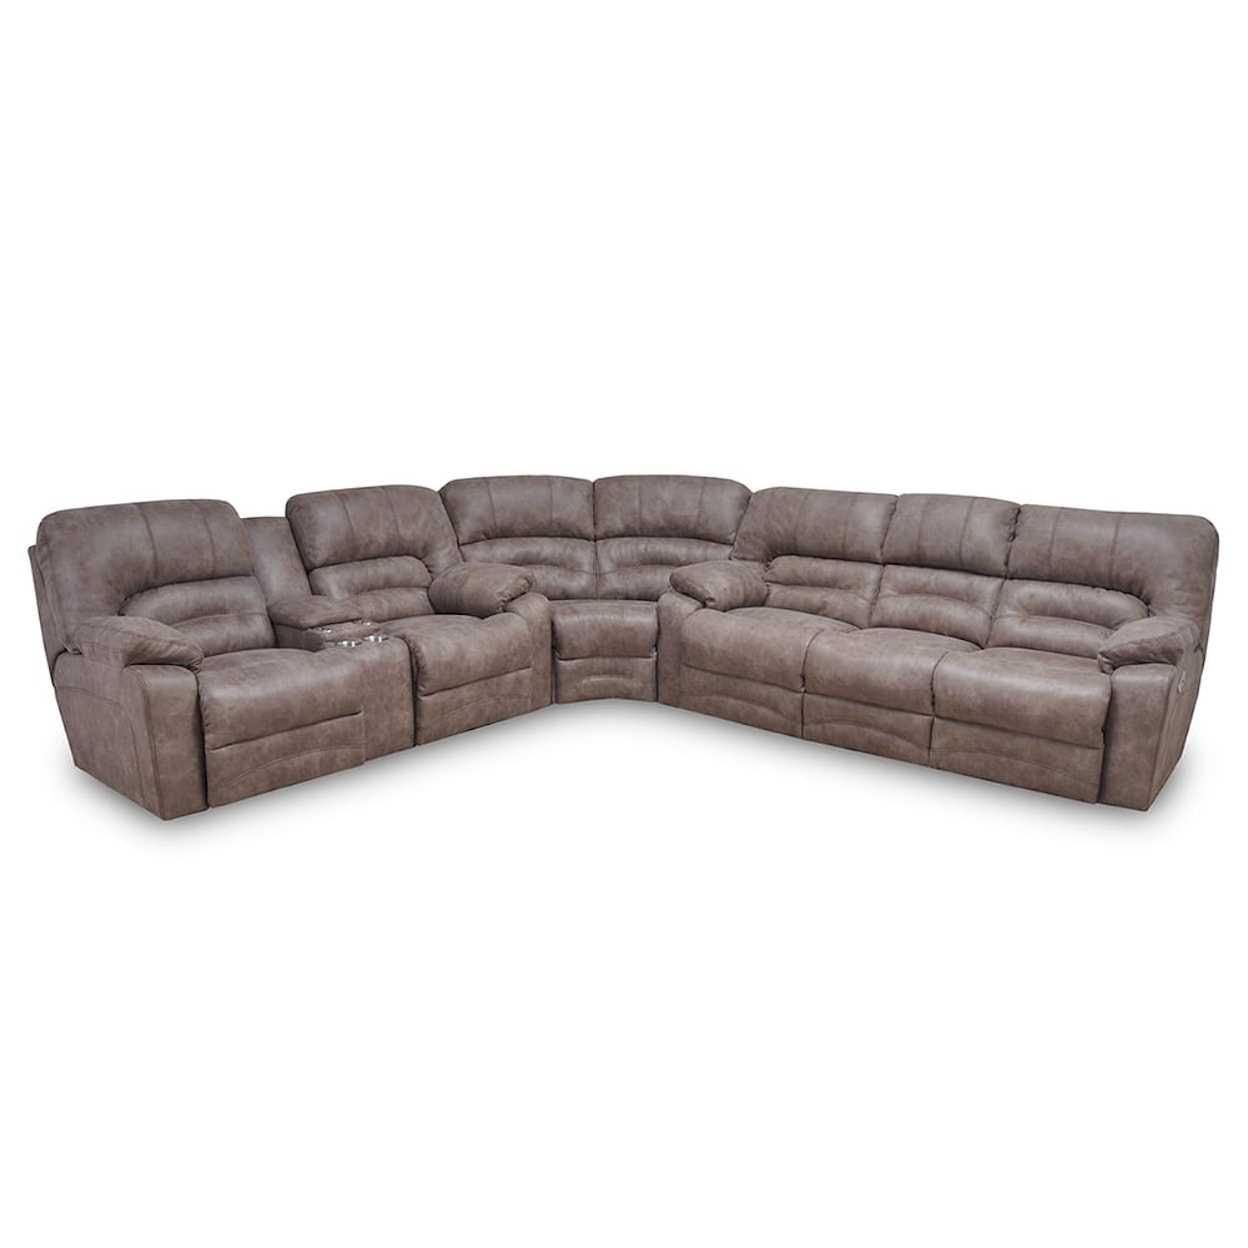 Franklin 500 Legacy Power Reclining Console Loveseat